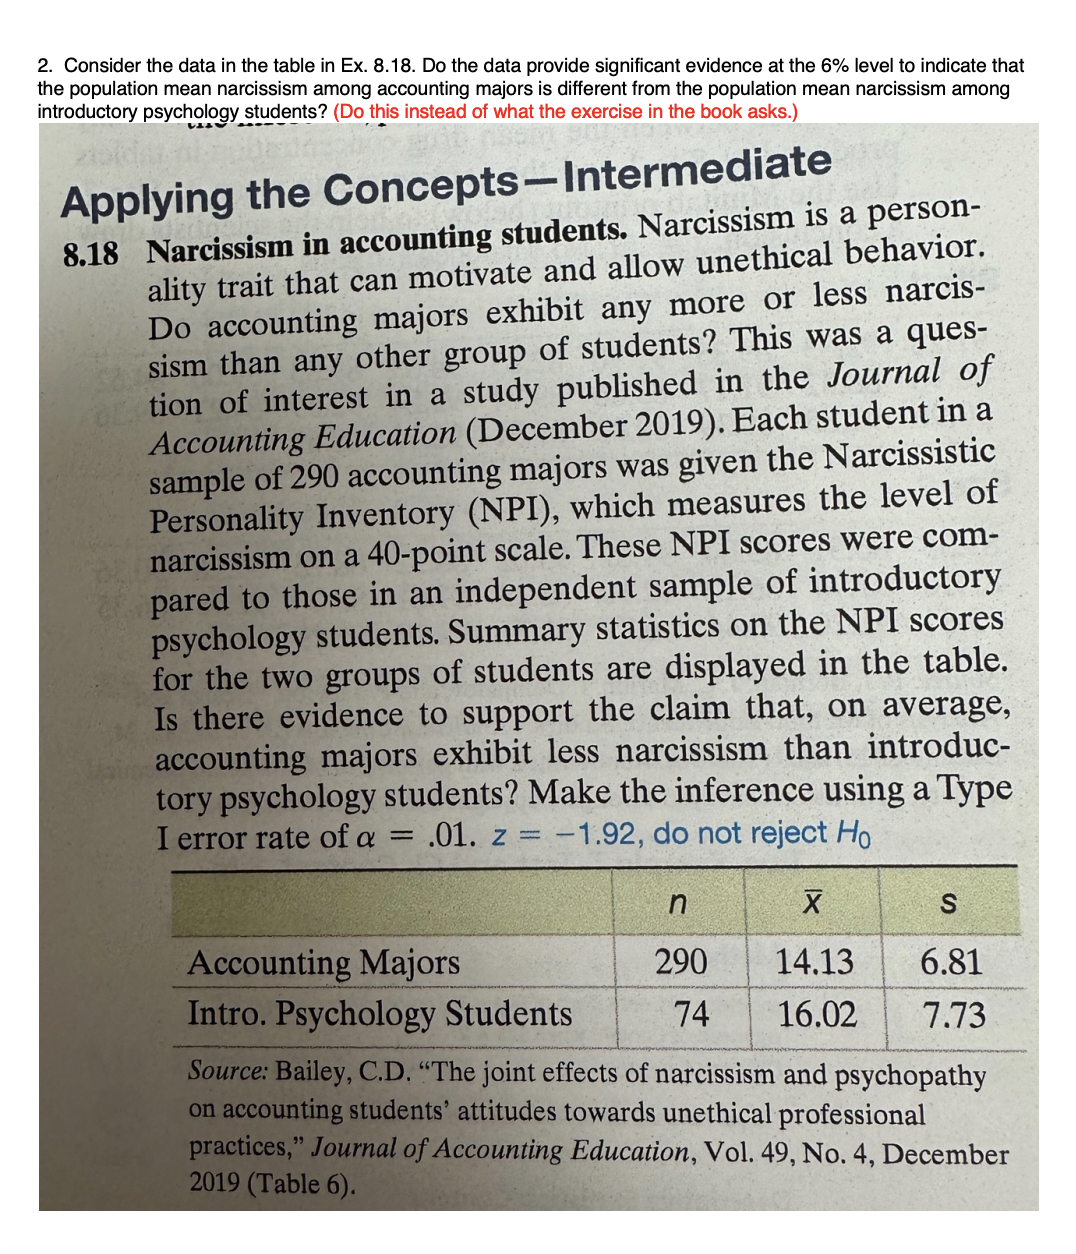 2. Consider the data in the table in Ex. 8.18. Do the data provide significant evidence at the 6% level to indicate that
the population mean narcissism among accounting majors is different from the population mean narcissism among
introductory psychology students? (Do this instead of what the exercise in the book asks.)
Applying the Concepts-Intermediate
8.18 Narcissism in accounting students. Narcissism is a person-
ality trait that can motivate and allow unethical behavior.
Do accounting majors exhibit any more or less narcis-
sism than any other group of students? This was a ques-
tion of interest in a study published in the Journal of
Accounting Education (December 2019). Each student in a
sample of 290 accounting majors was given the Narcissistic
Personality Inventory (NPI), which measures the level of
narcissism on a 40-point scale. These NPI scores were com-
pared to those in an independent sample of introductory
psychology students. Summary statistics on the NPI scores
for the two groups of students are displayed in the table.
Is there evidence to support the claim that, on average,
accounting majors exhibit less narcissism than introduc-
tory psychology students? Make the inference using a Type
I error rate of a .01. z = -1.92, do not reject Ho
=
n
290
74
X
14.13
16.02
S
6.81
7.73
Accounting Majors
Intro. Psychology Students
Source: Bailey, C.D. "The joint effects of narcissism and psychopathy
on accounting students' attitudes towards unethical professional
practices," Journal of Accounting Education, Vol. 49, No. 4, December
2019 (Table 6).